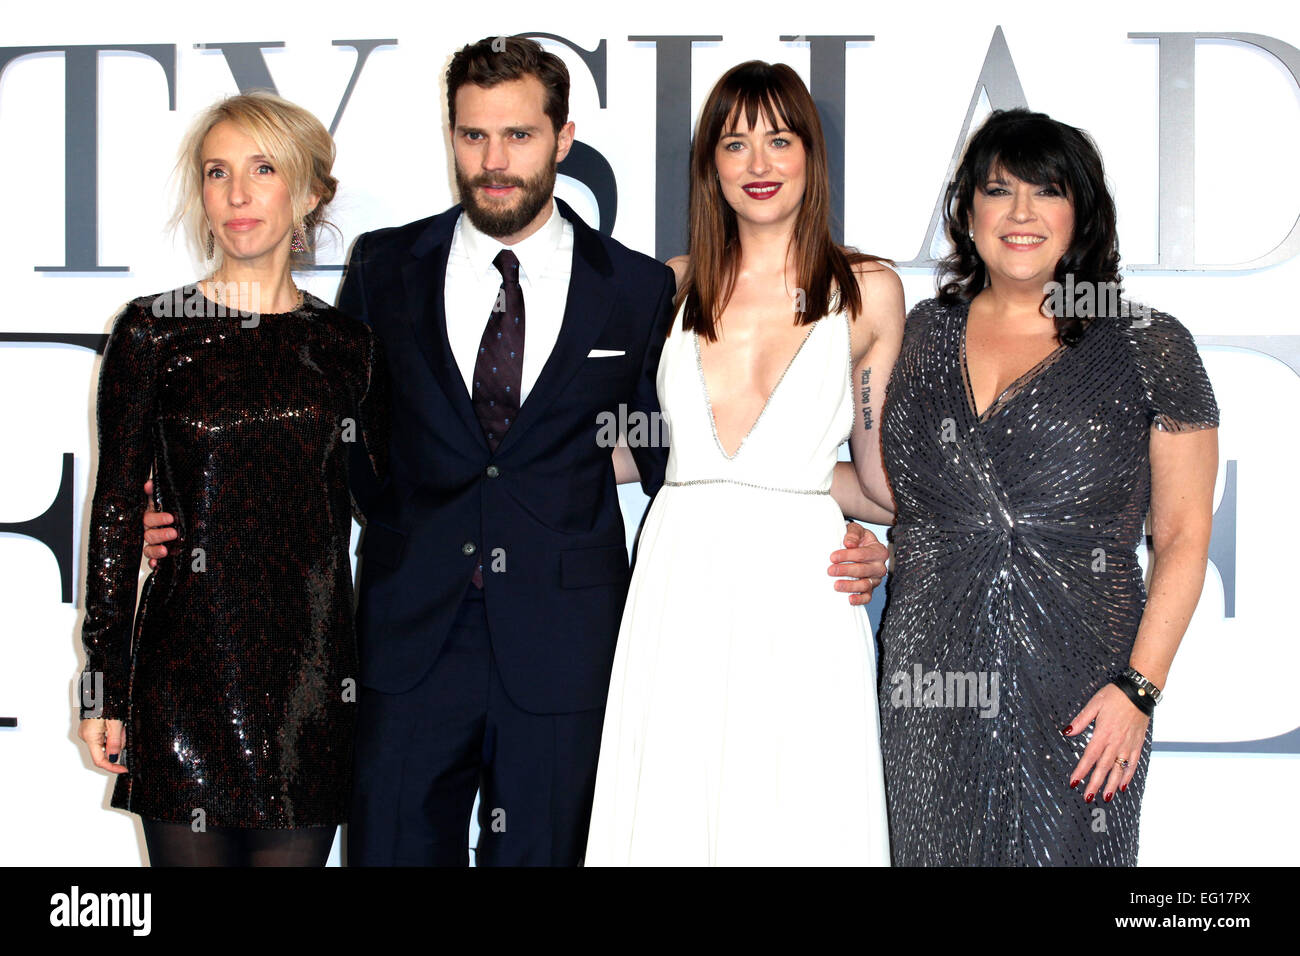 London, UK. 12th Feb, 2015. Sam Taylor-Johnson, Jamie Dornan, Dakota Johnson and E L James arriving for the Fifty Shades of Grey UK Premiere, at Odeon Leicester Square, London. Credit:  dpa picture alliance/Alamy Live News Stock Photo